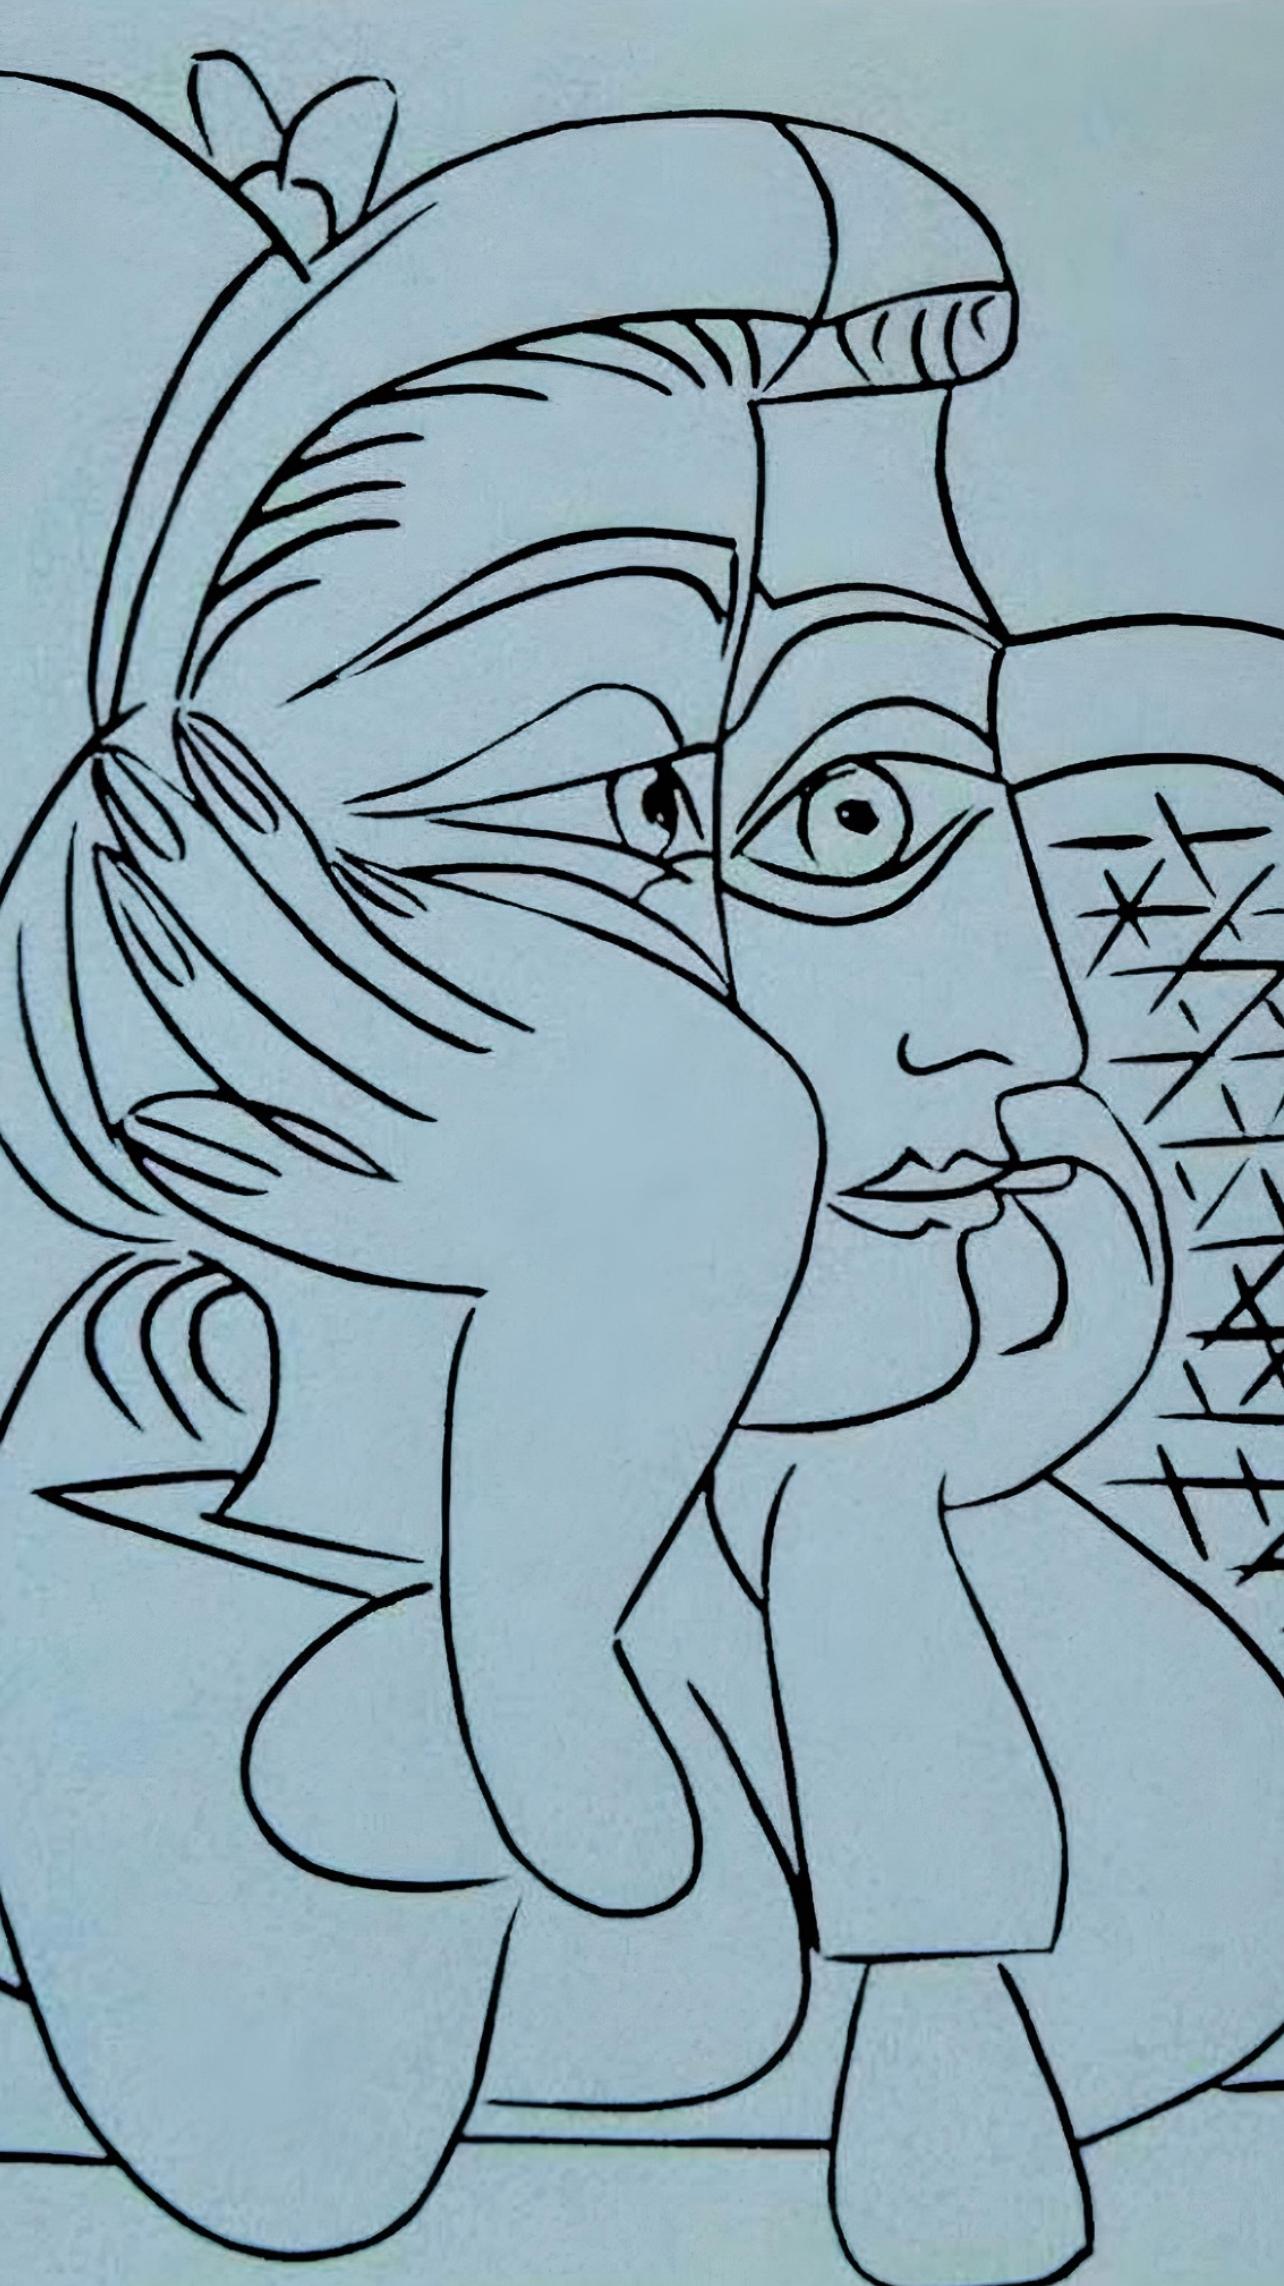 Picasso, Jacqueline Leaning on Her Elbows, Éditions Cercle d’Art (after) - Print by Pablo Picasso